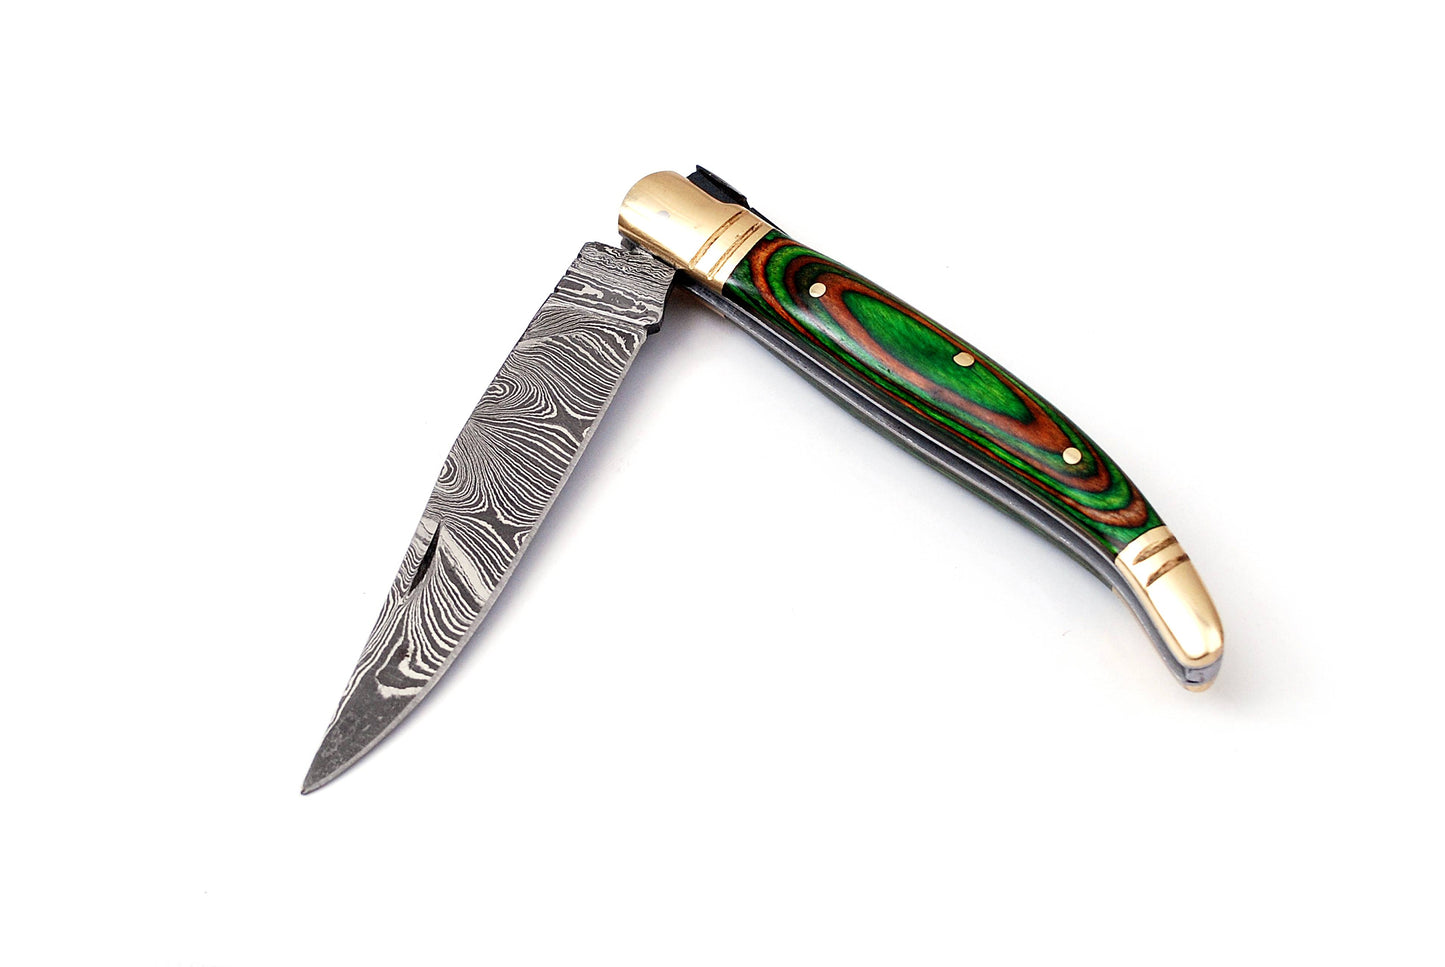 Folding Damascus steel knife, 8.5" Long with 4" hand forged custom twist pattern Blade. 2 tone Green wood scale with brass bolster, Cow hide leather sheath included